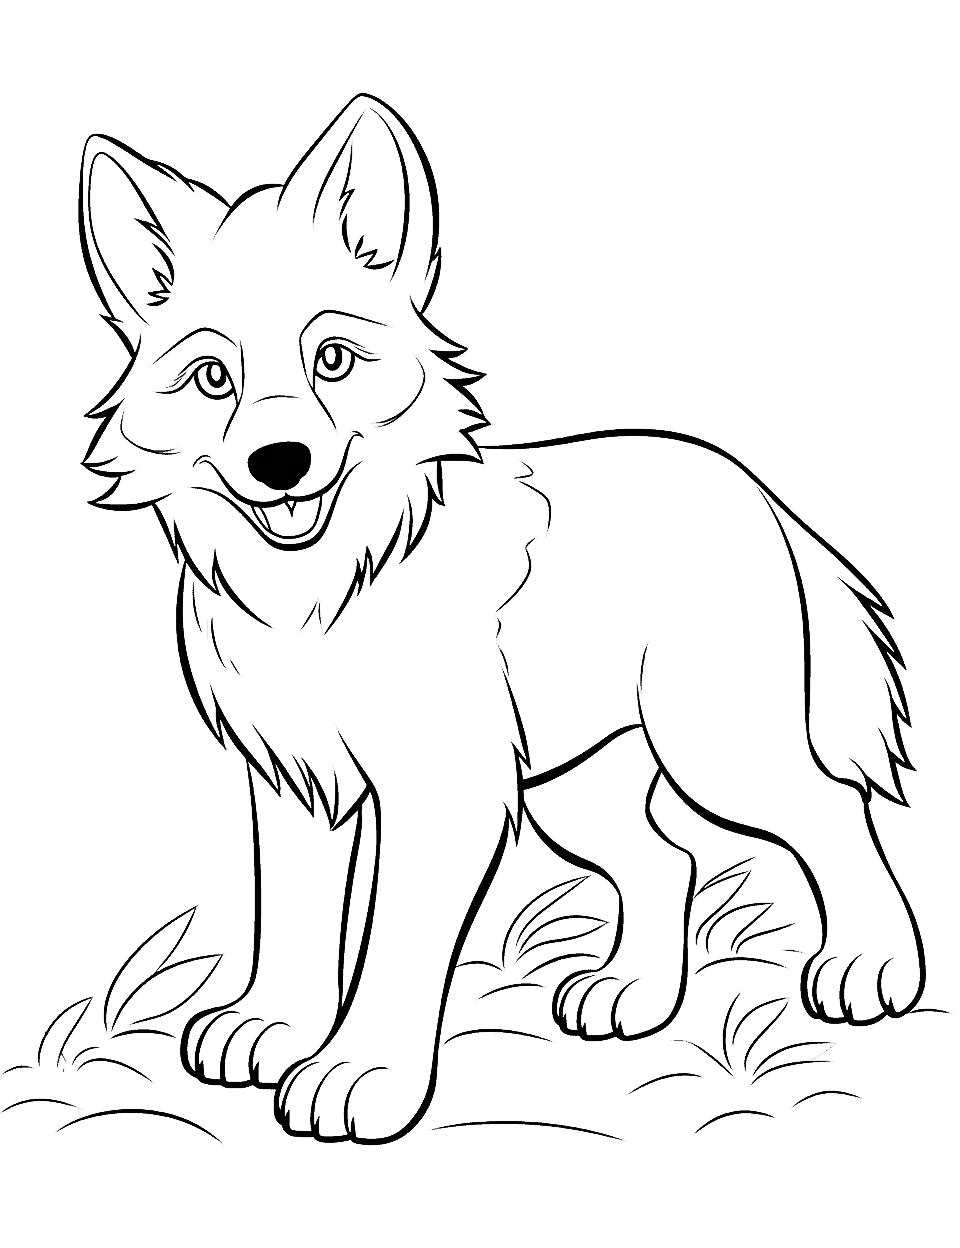 Playful Wolf Pup Coloring Page - A young wolf pup frolicking in a meadow.